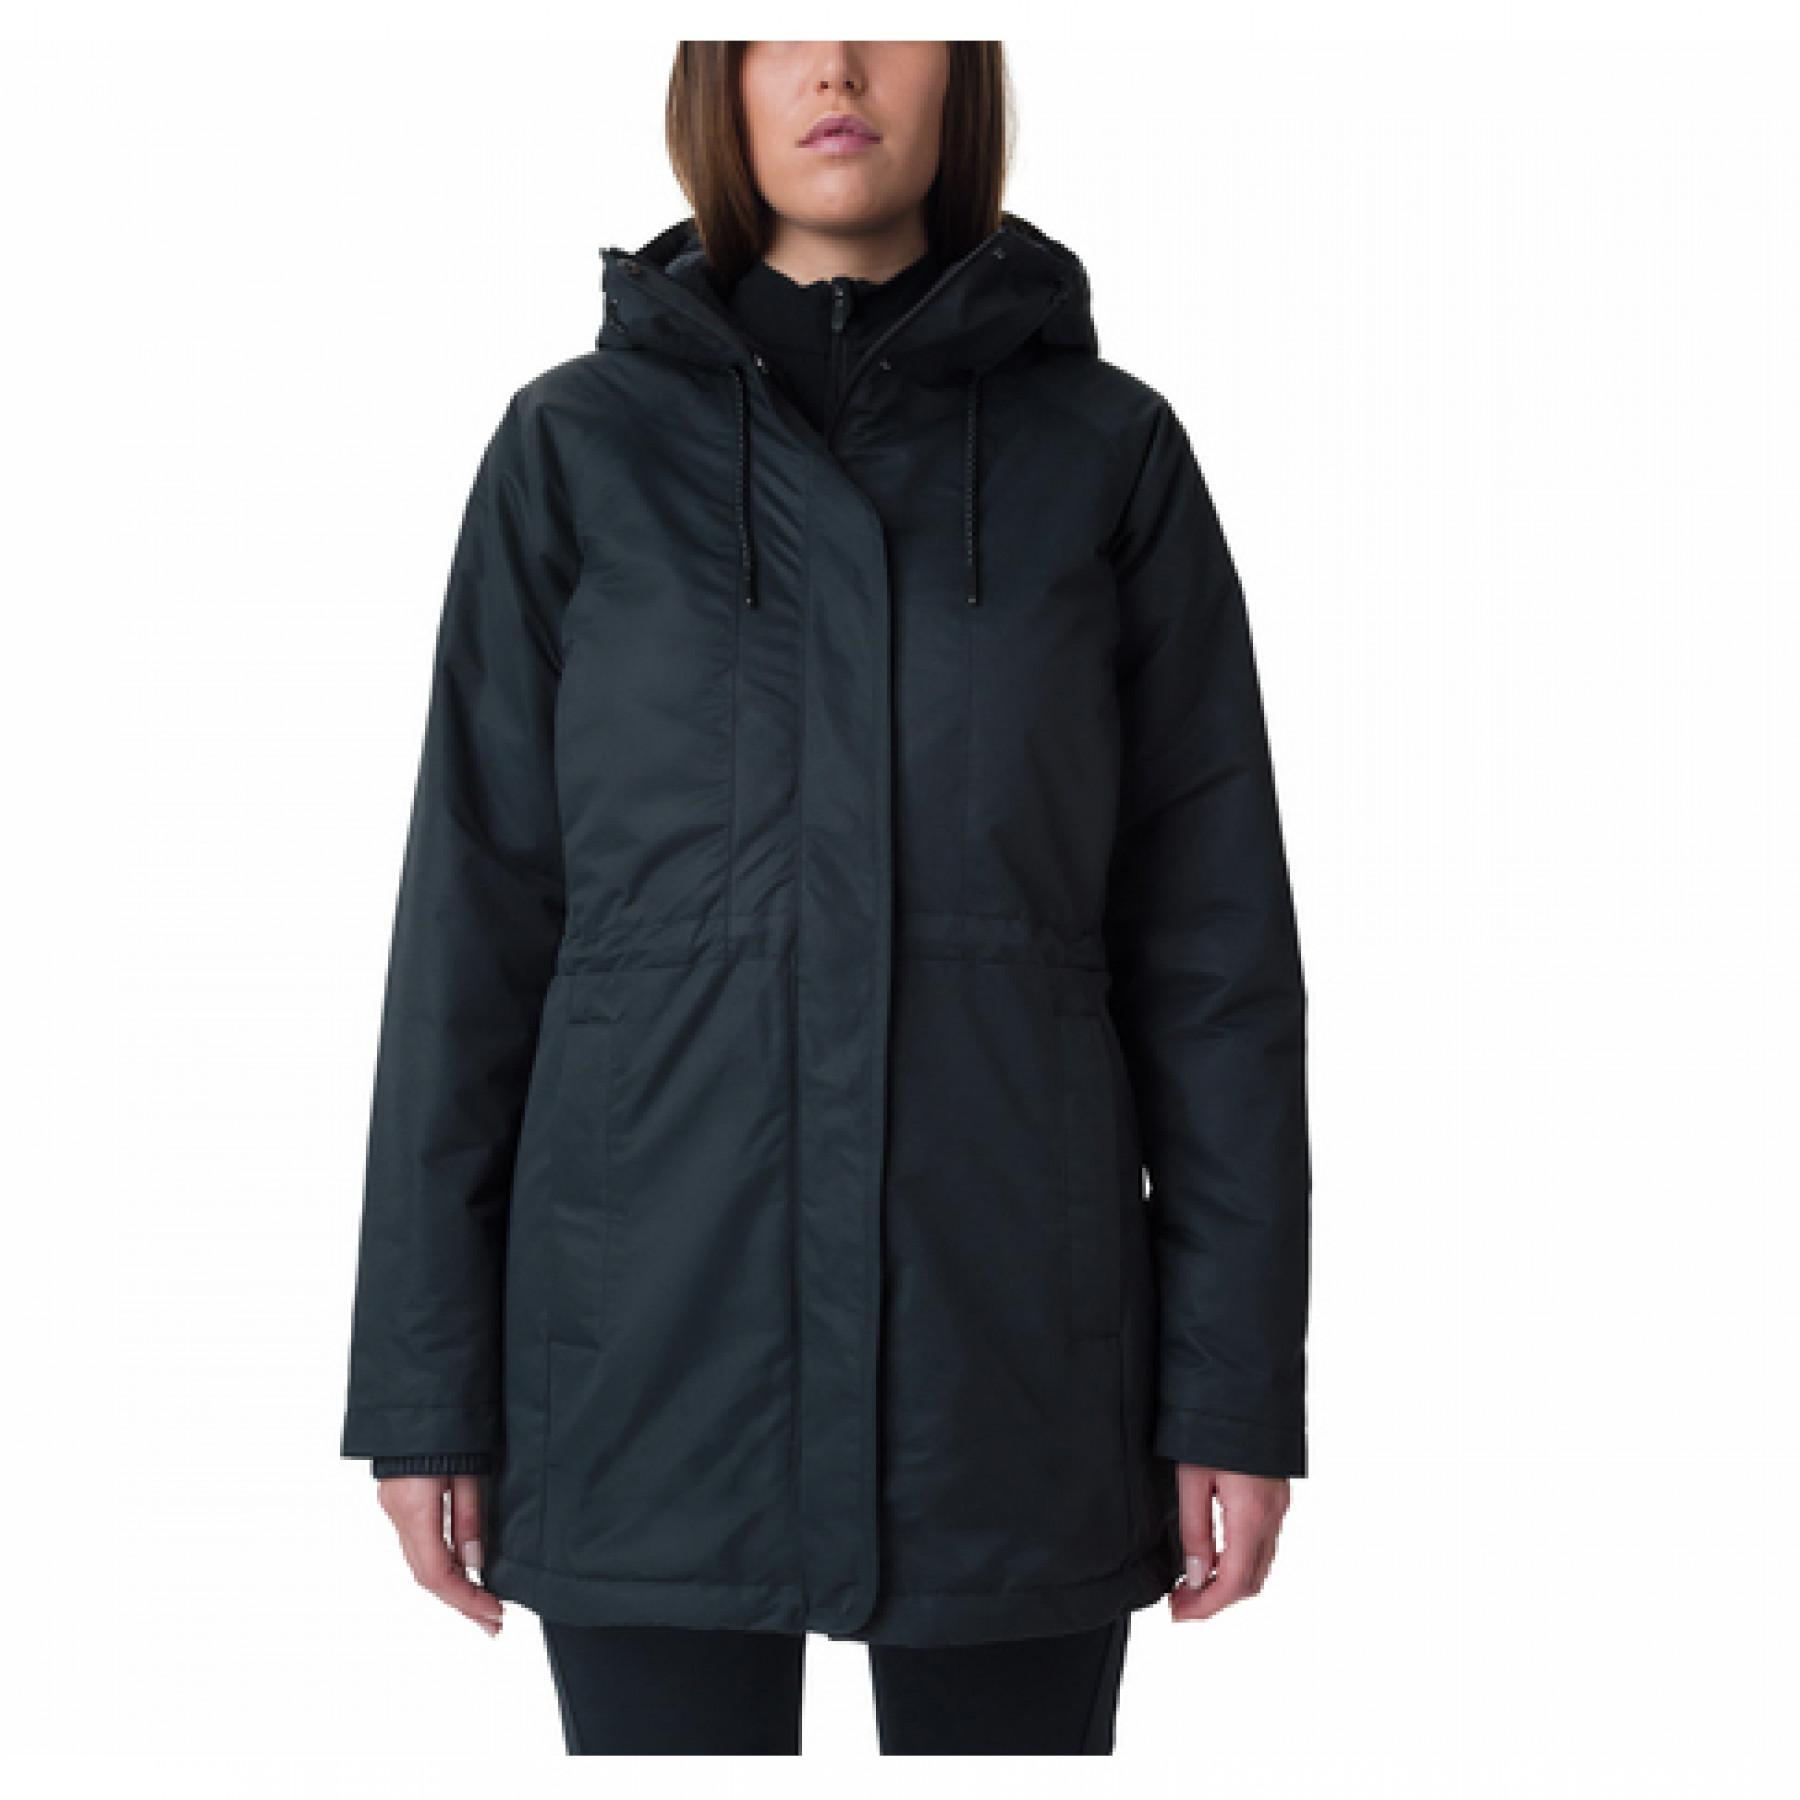 Veste femme Columbia South Canyon Sherpa Lined